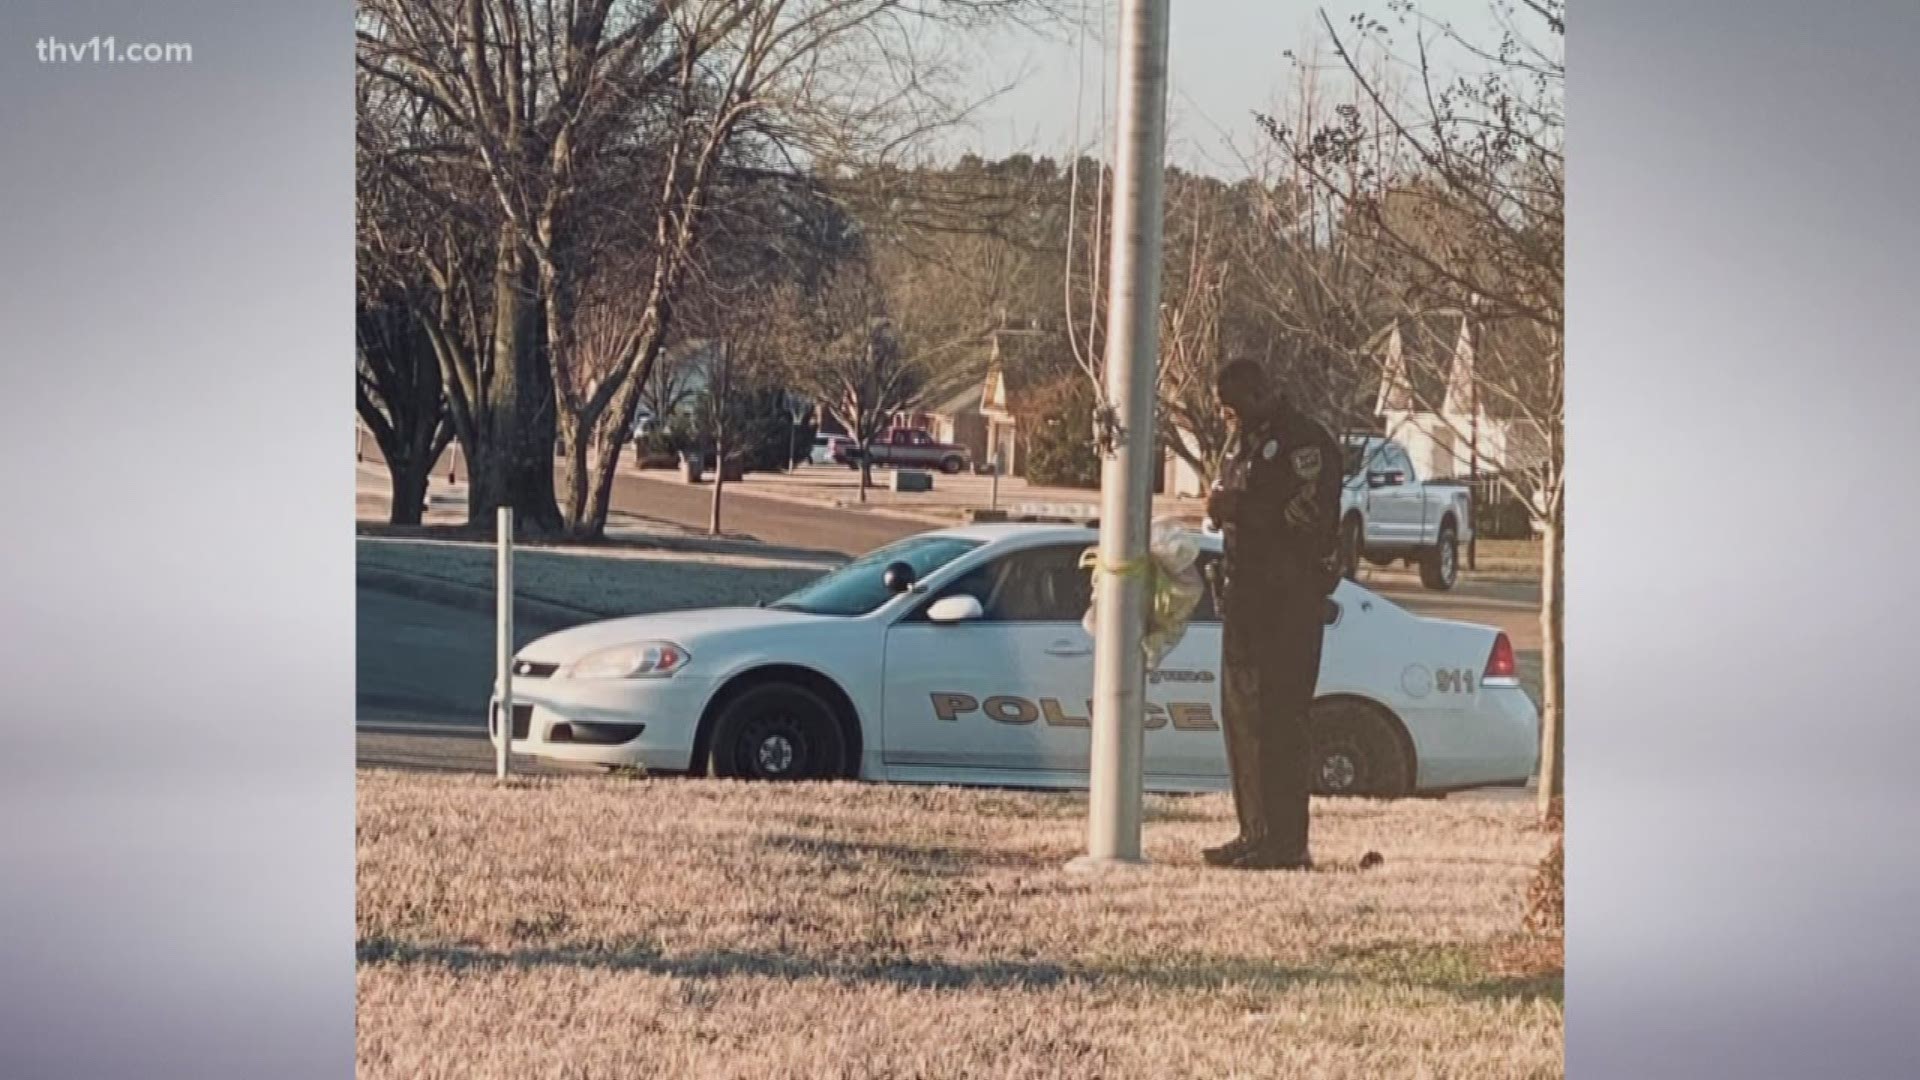 One Arkansas officer stops at the flagpole every day to say a special prayer for the school systems, children and the community.